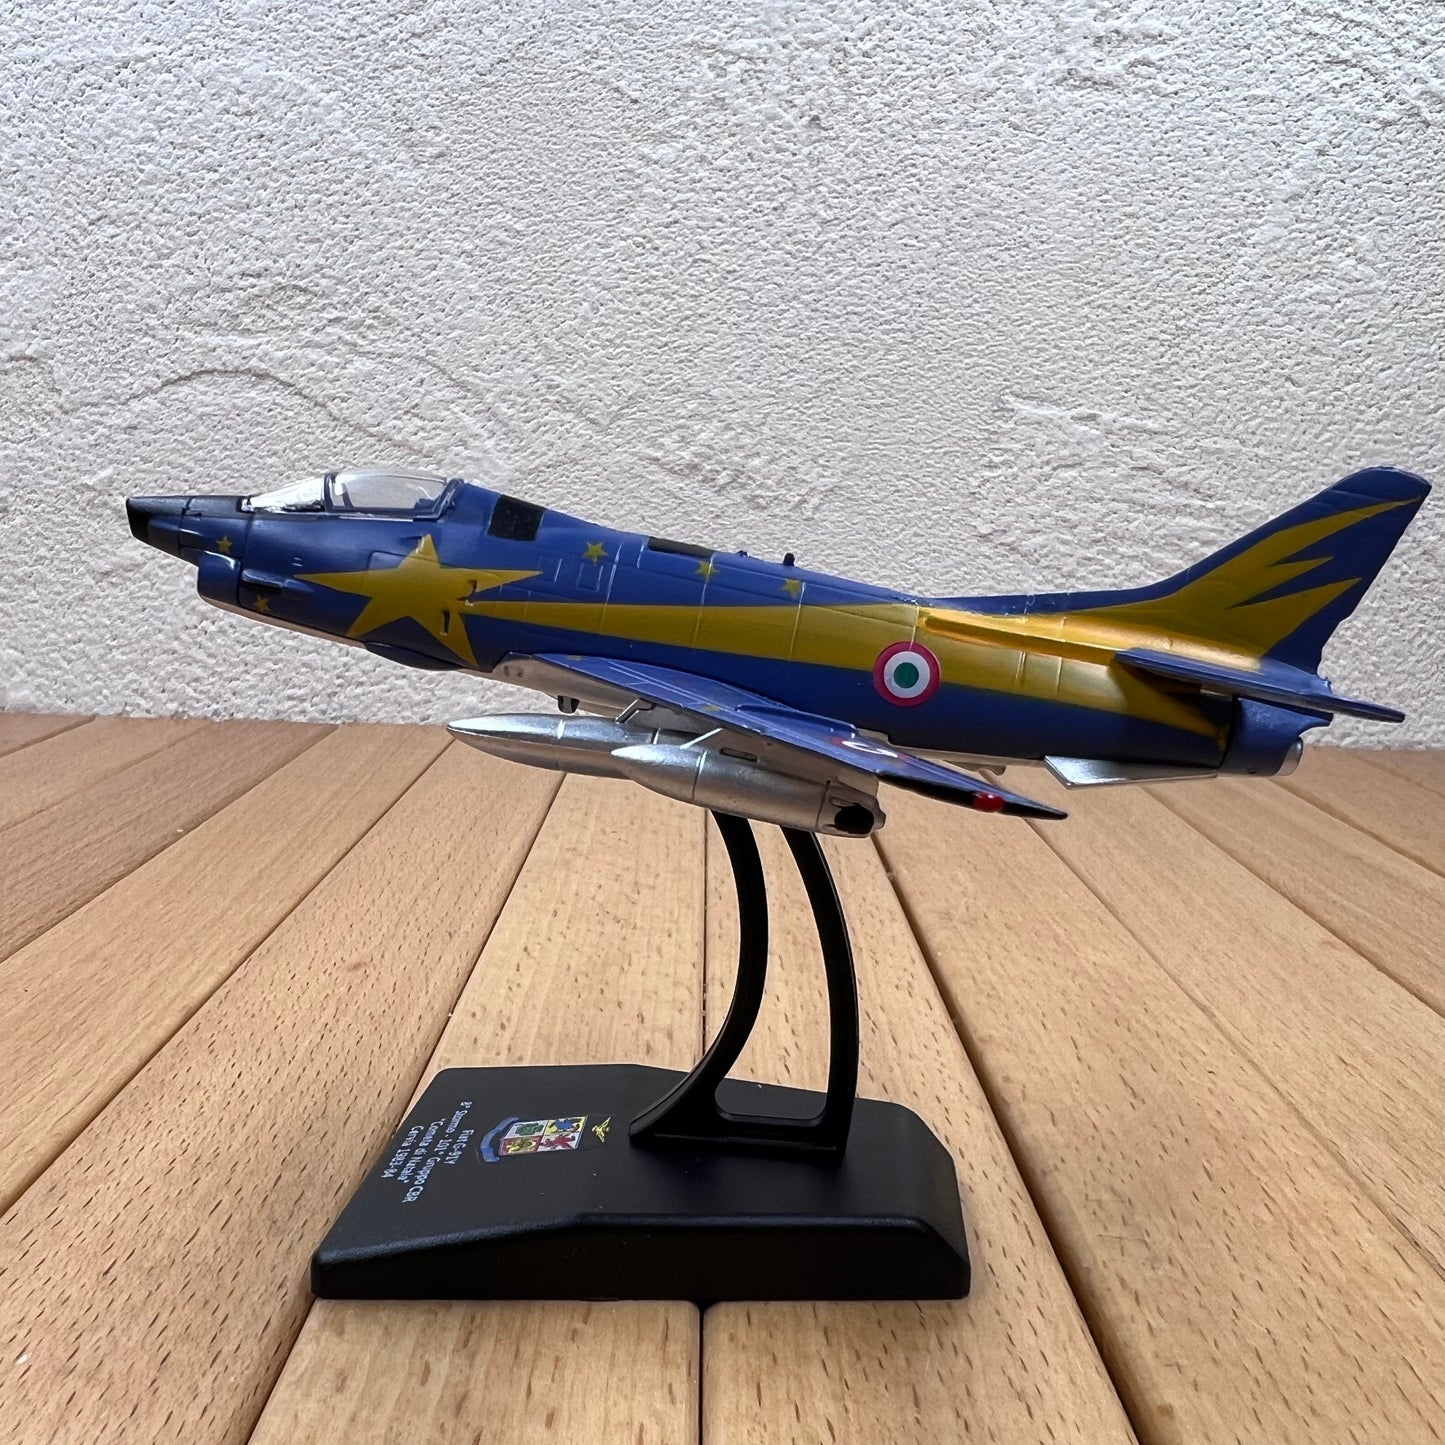 1/100 Scale 1983 Fiat G.91Y Jet Fighter Diecast Aircraft Model